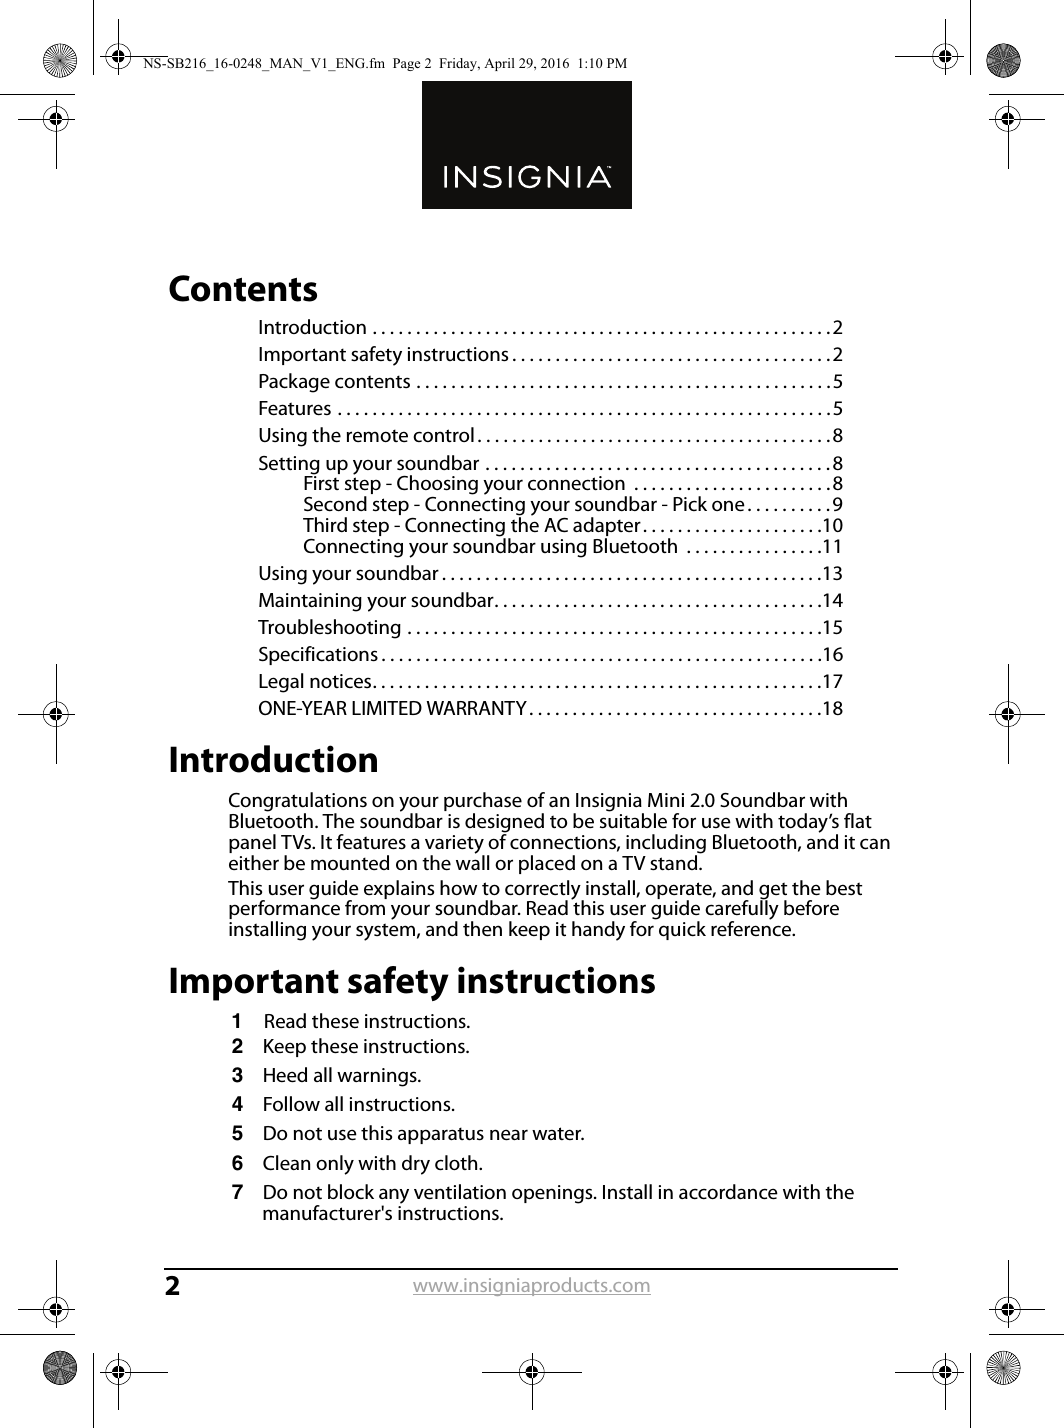 www.insigniaproducts.com2ContentsIntroduction . . . . . . . . . . . . . . . . . . . . . . . . . . . . . . . . . . . . . . . . . . . . . . . . . . . . .2Important safety instructions . . . . . . . . . . . . . . . . . . . . . . . . . . . . . . . . . . . . .2Package contents . . . . . . . . . . . . . . . . . . . . . . . . . . . . . . . . . . . . . . . . . . . . . . . .5Features . . . . . . . . . . . . . . . . . . . . . . . . . . . . . . . . . . . . . . . . . . . . . . . . . . . . . . . . .5Using the remote control. . . . . . . . . . . . . . . . . . . . . . . . . . . . . . . . . . . . . . . . .8Setting up your soundbar . . . . . . . . . . . . . . . . . . . . . . . . . . . . . . . . . . . . . . . .8First step - Choosing your connection  . . . . . . . . . . . . . . . . . . . . . . .8Second step - Connecting your soundbar - Pick one . . . . . . . . . .9Third step - Connecting the AC adapter . . . . . . . . . . . . . . . . . . . . .10Connecting your soundbar using Bluetooth  . . . . . . . . . . . . . . . .11Using your soundbar . . . . . . . . . . . . . . . . . . . . . . . . . . . . . . . . . . . . . . . . . . . .13Maintaining your soundbar. . . . . . . . . . . . . . . . . . . . . . . . . . . . . . . . . . . . . .14Troubleshooting . . . . . . . . . . . . . . . . . . . . . . . . . . . . . . . . . . . . . . . . . . . . . . . .15Specifications . . . . . . . . . . . . . . . . . . . . . . . . . . . . . . . . . . . . . . . . . . . . . . . . . . .16Legal notices. . . . . . . . . . . . . . . . . . . . . . . . . . . . . . . . . . . . . . . . . . . . . . . . . . . .17ONE-YEAR LIMITED WARRANTY. . . . . . . . . . . . . . . . . . . . . . . . . . . . . . . . . .18IntroductionCongratulations on your purchase of an Insignia Mini 2.0 Soundbar with Bluetooth. The soundbar is designed to be suitable for use with today’s flat panel TVs. It features a variety of connections, including Bluetooth, and it can either be mounted on the wall or placed on a TV stand.This user guide explains how to correctly install, operate, and get the best performance from your soundbar. Read this user guide carefully before installing your system, and then keep it handy for quick reference.Important safety instructions1Read these instructions.2Keep these instructions.3Heed all warnings.4Follow all instructions.5Do not use this apparatus near water.6Clean only with dry cloth.7Do not block any ventilation openings. Install in accordance with the manufacturer&apos;s instructions.NS-SB216_16-0248_MAN_V1_ENG.fm  Page 2  Friday, April 29, 2016  1:10 PM